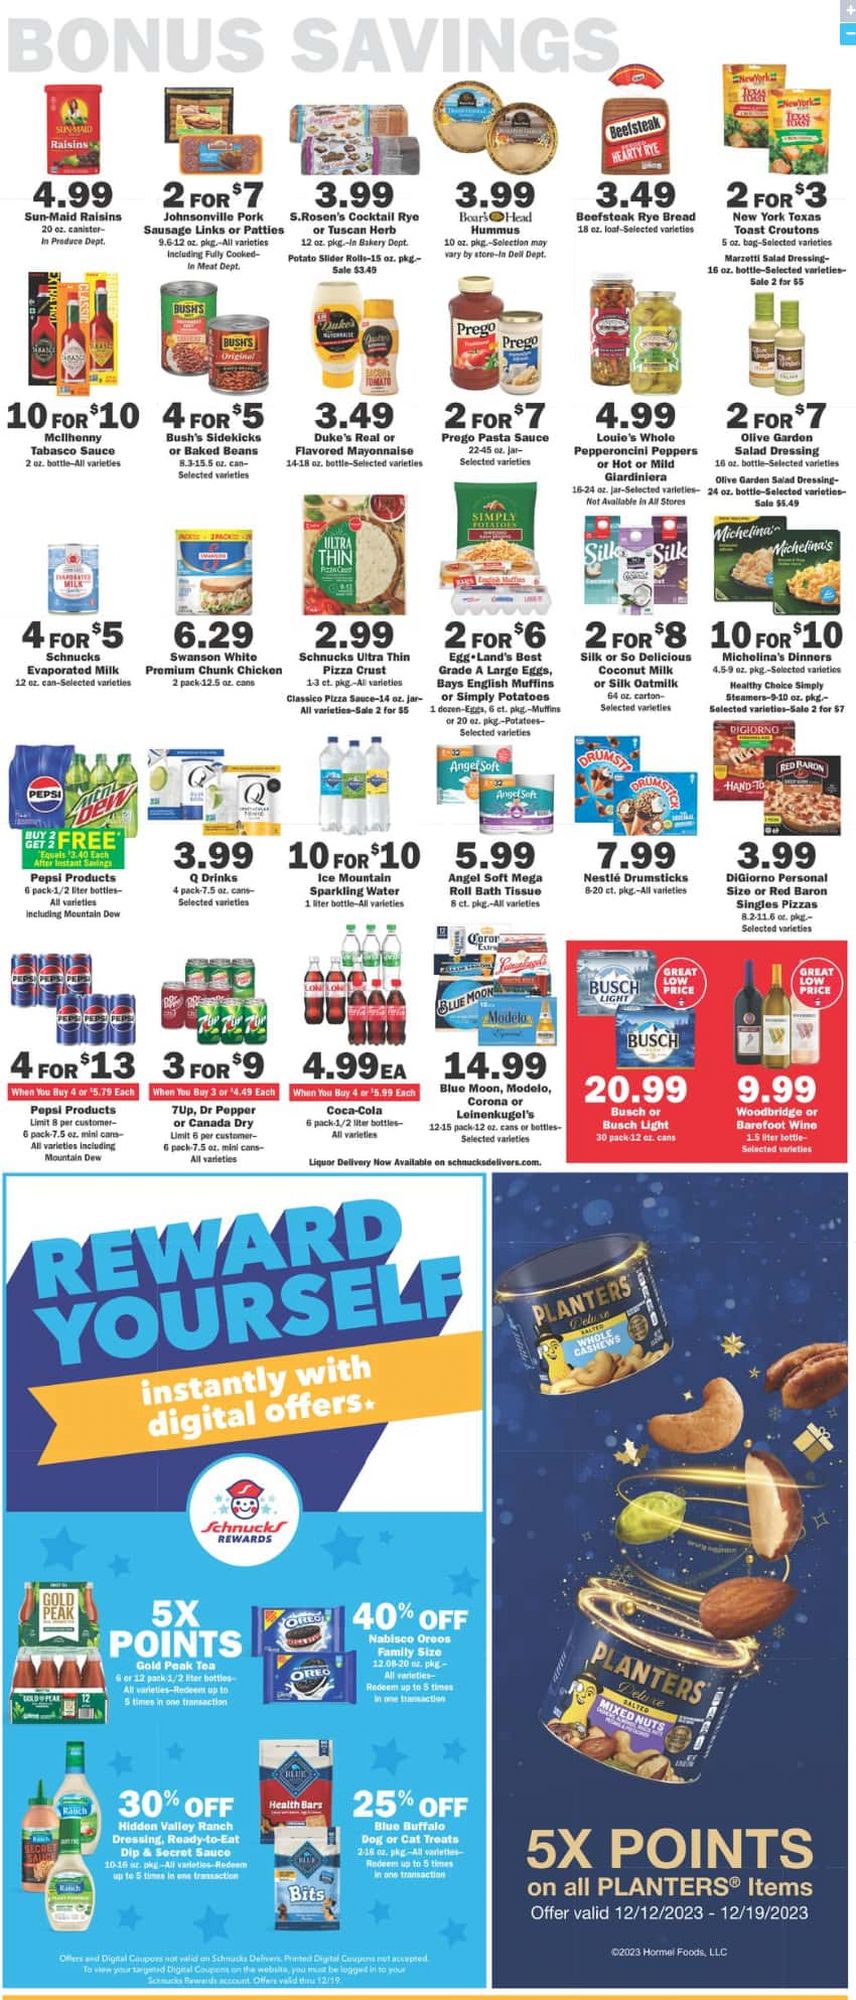 Schnucks Weekly July 2024 Weekly Sales, Deals, Discounts and Digital Coupons.